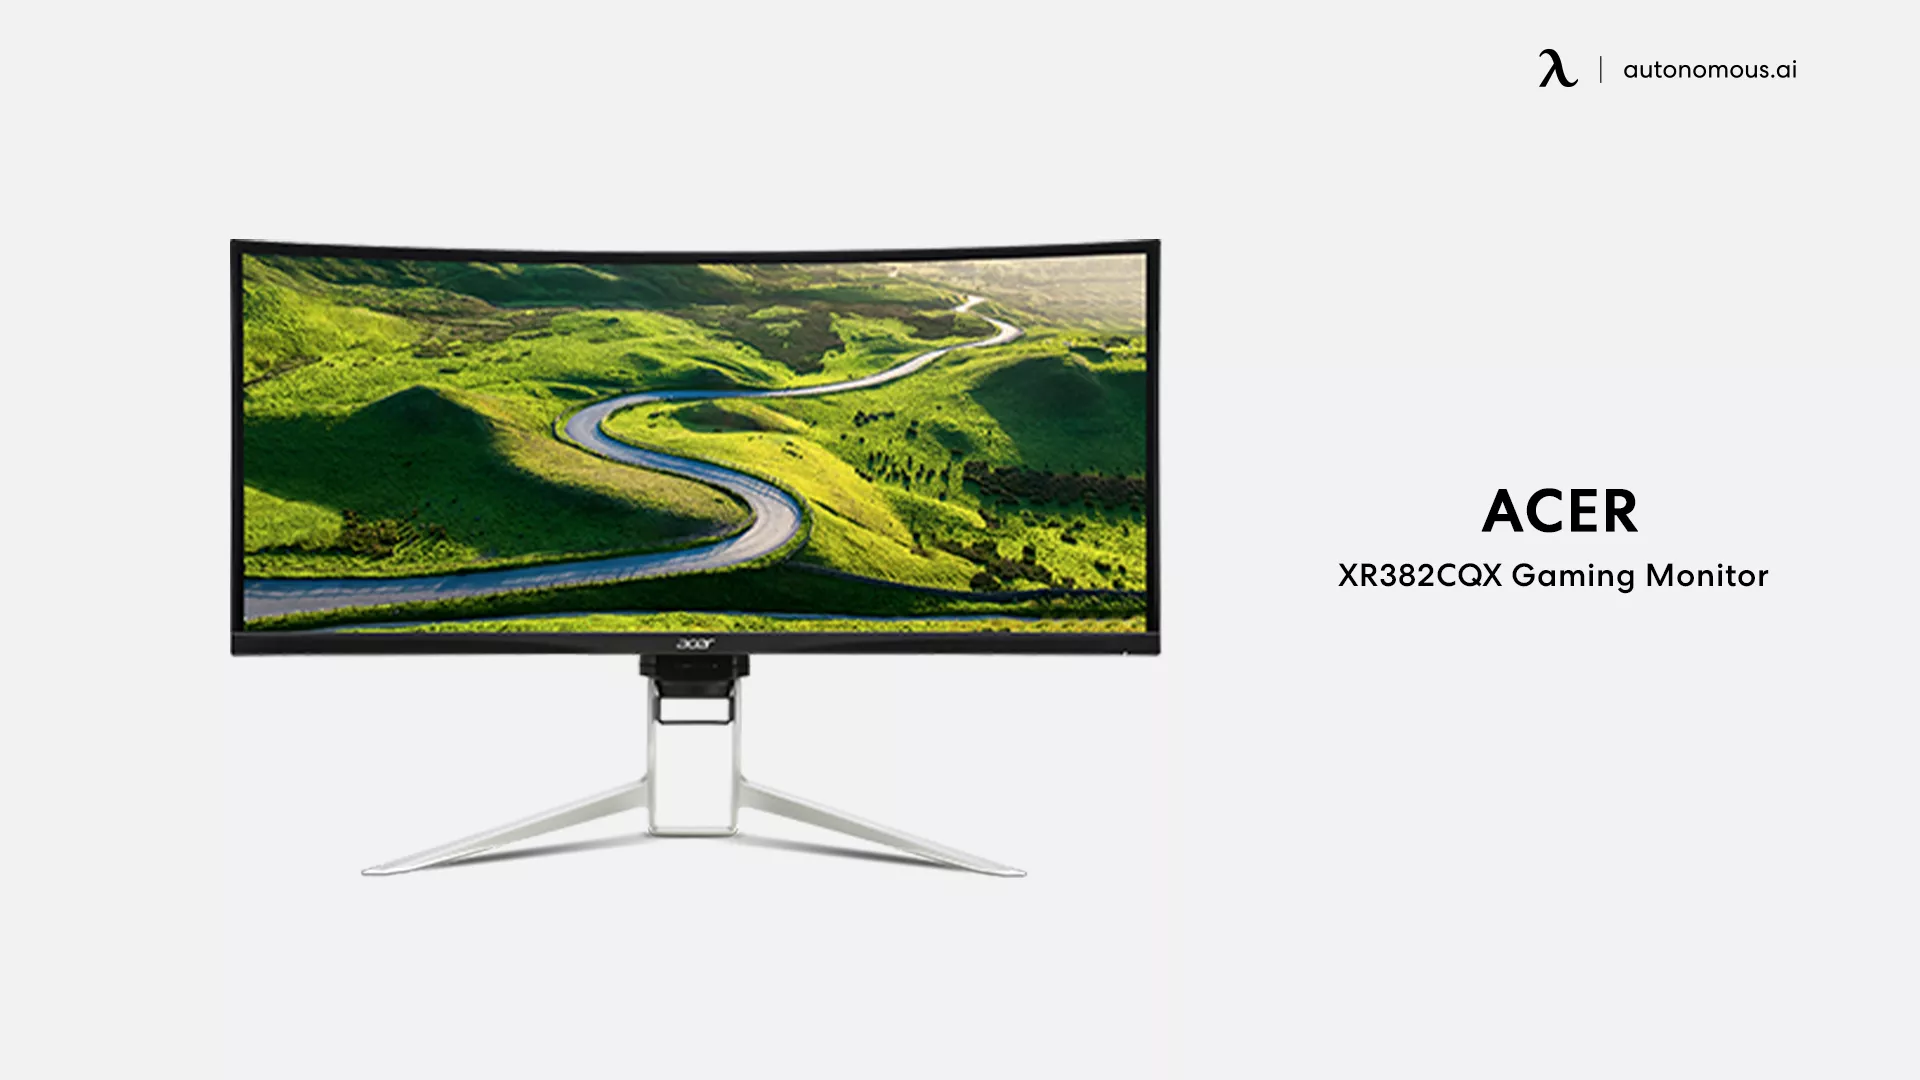 Acer XR382CQX Gaming Monitor